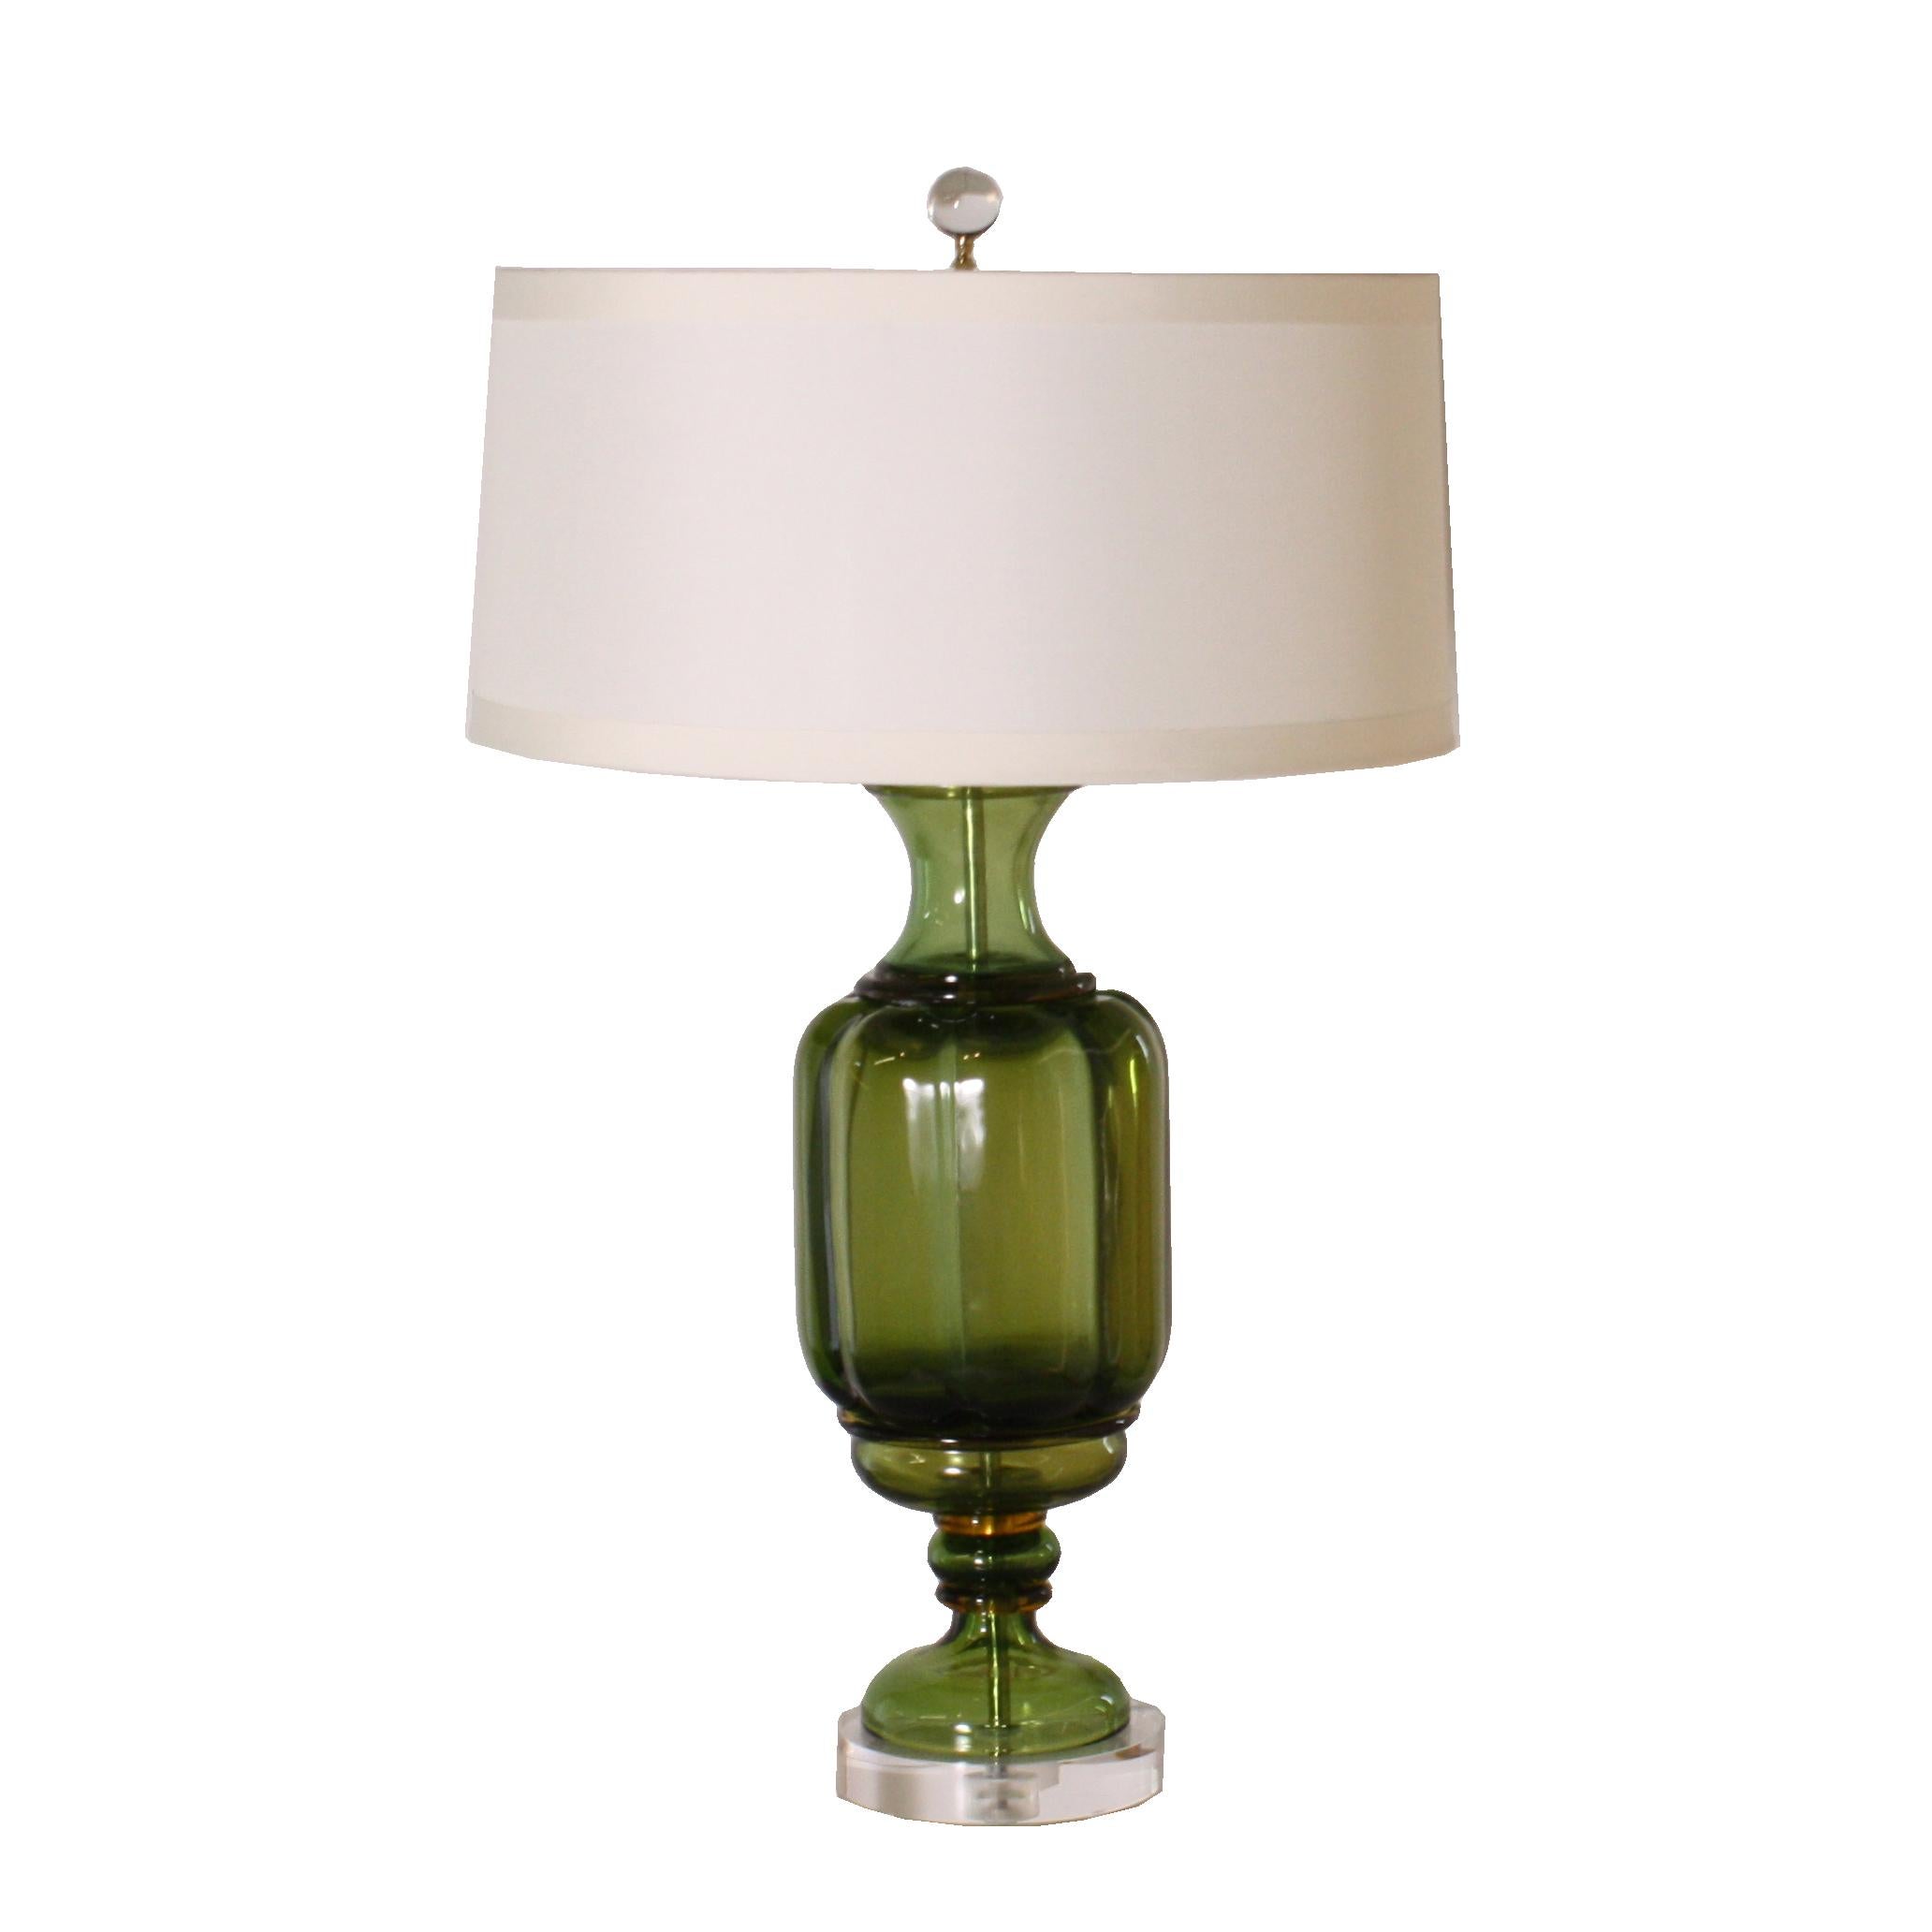 Mid-20th Century Large Green Marbro Glass Lamp, circa 1960 For Sale